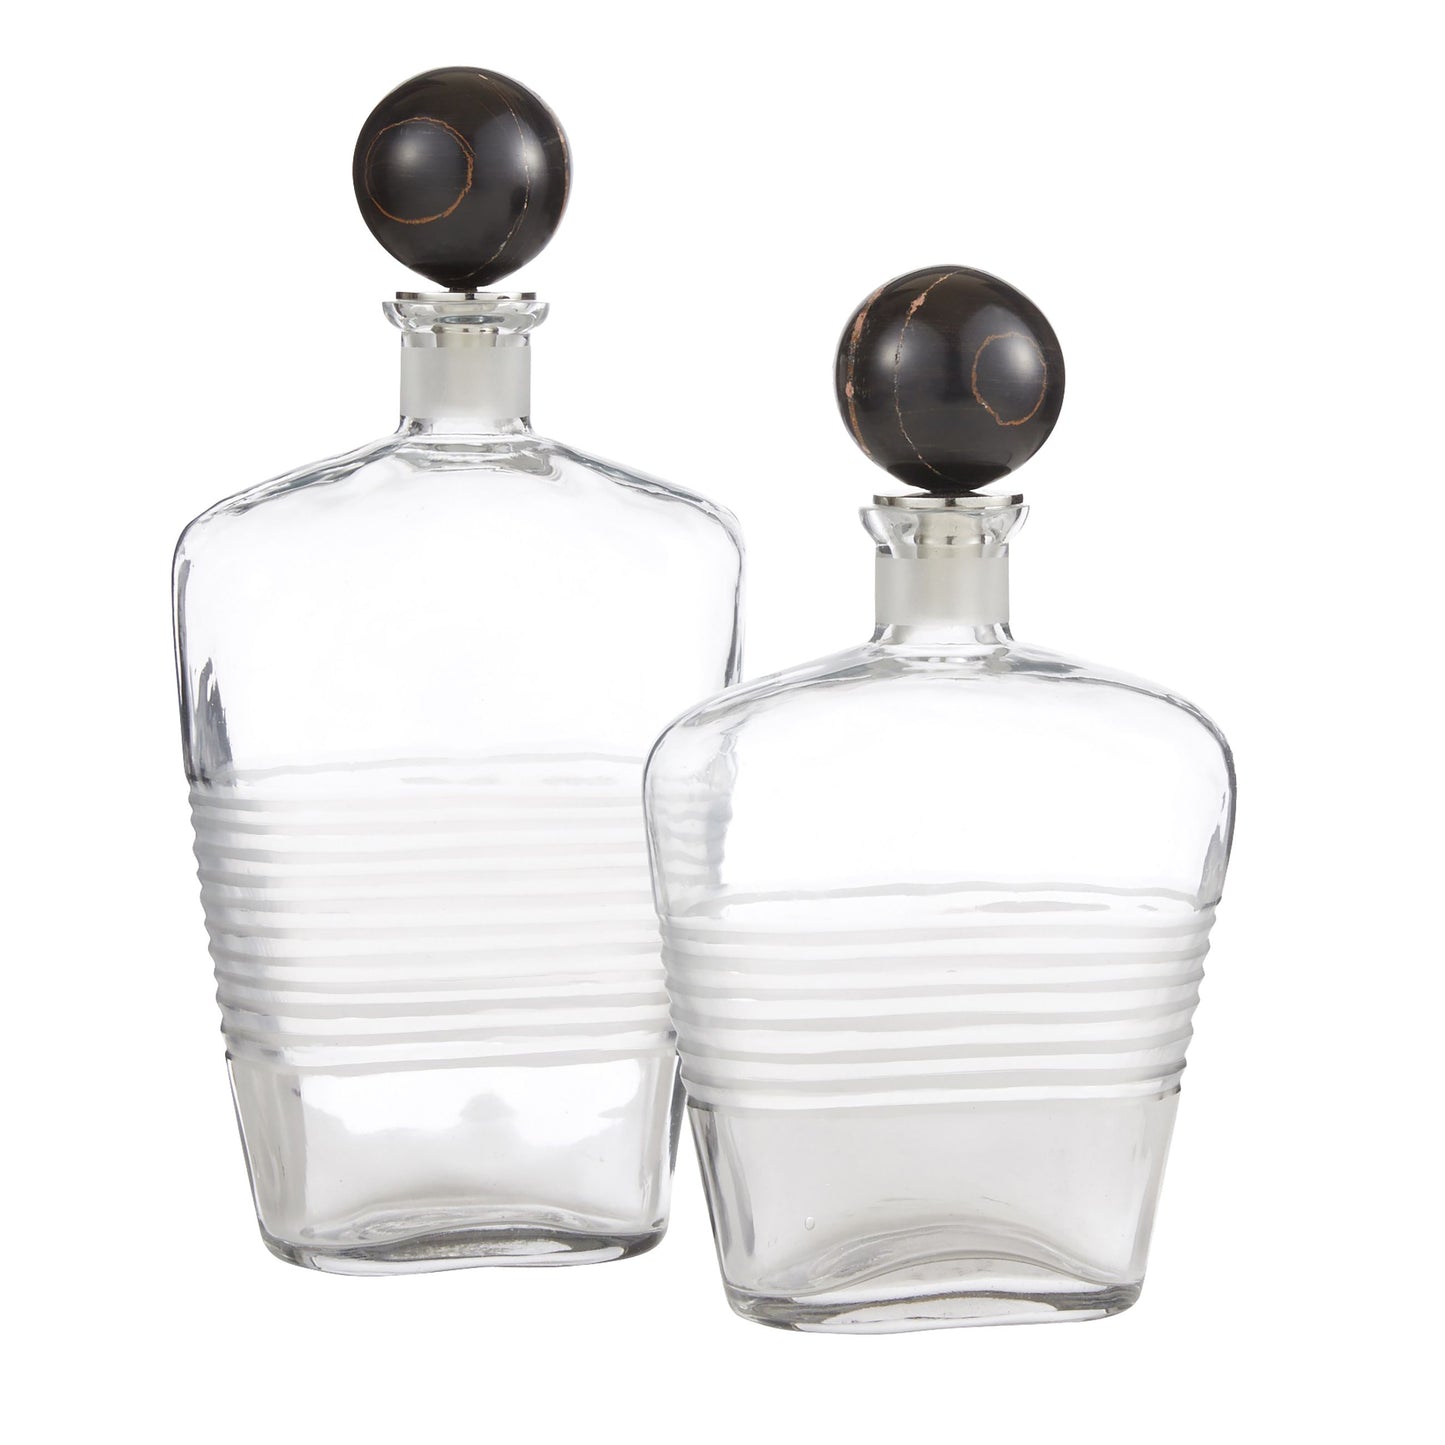 arteriors eaves decanters set of 2